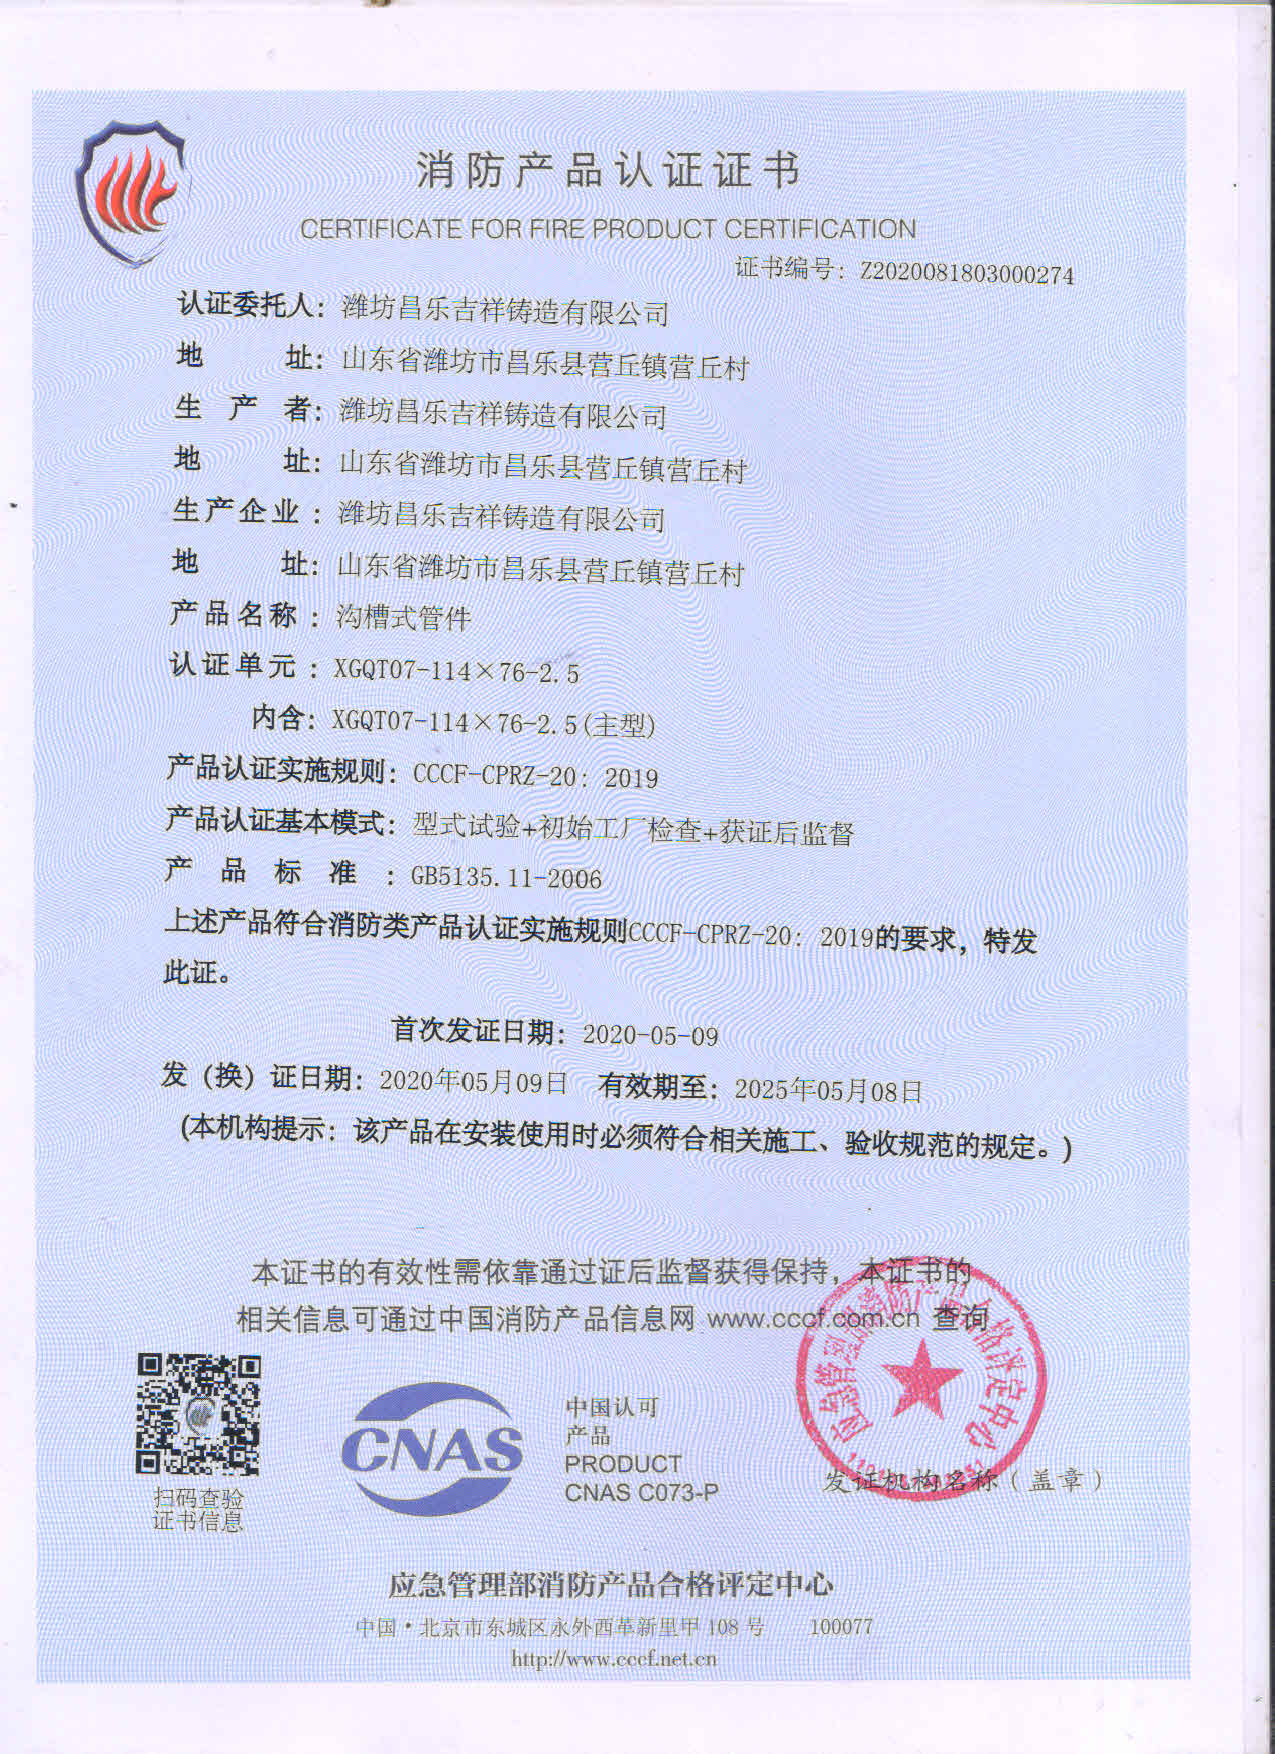 Certificate for Fire Product Certification 